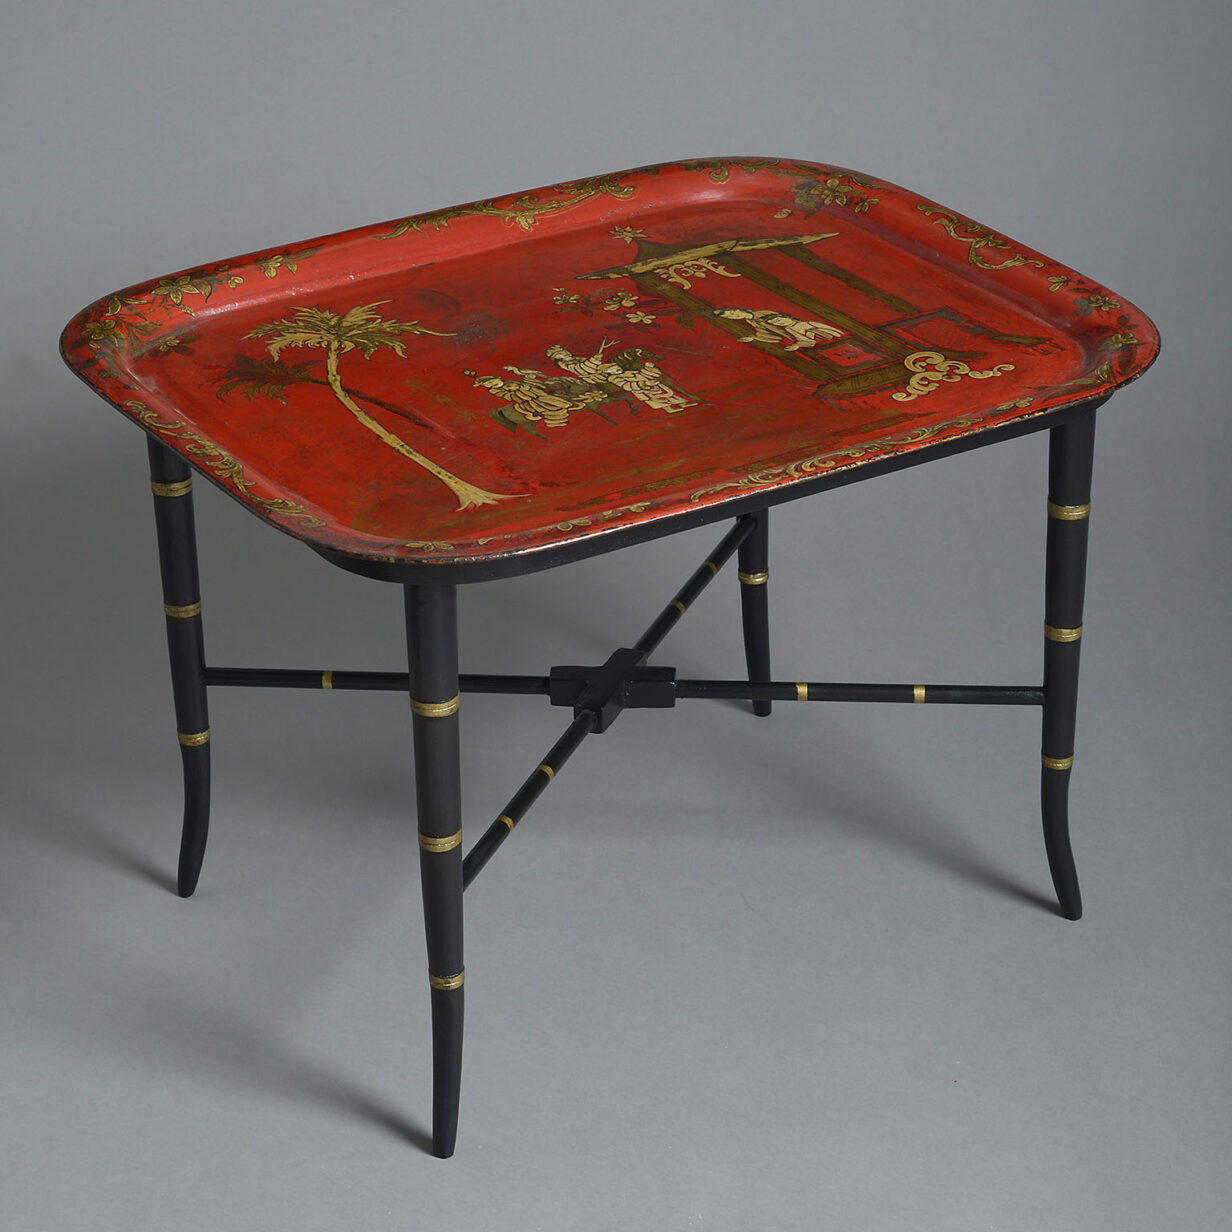 Red japanned tray table